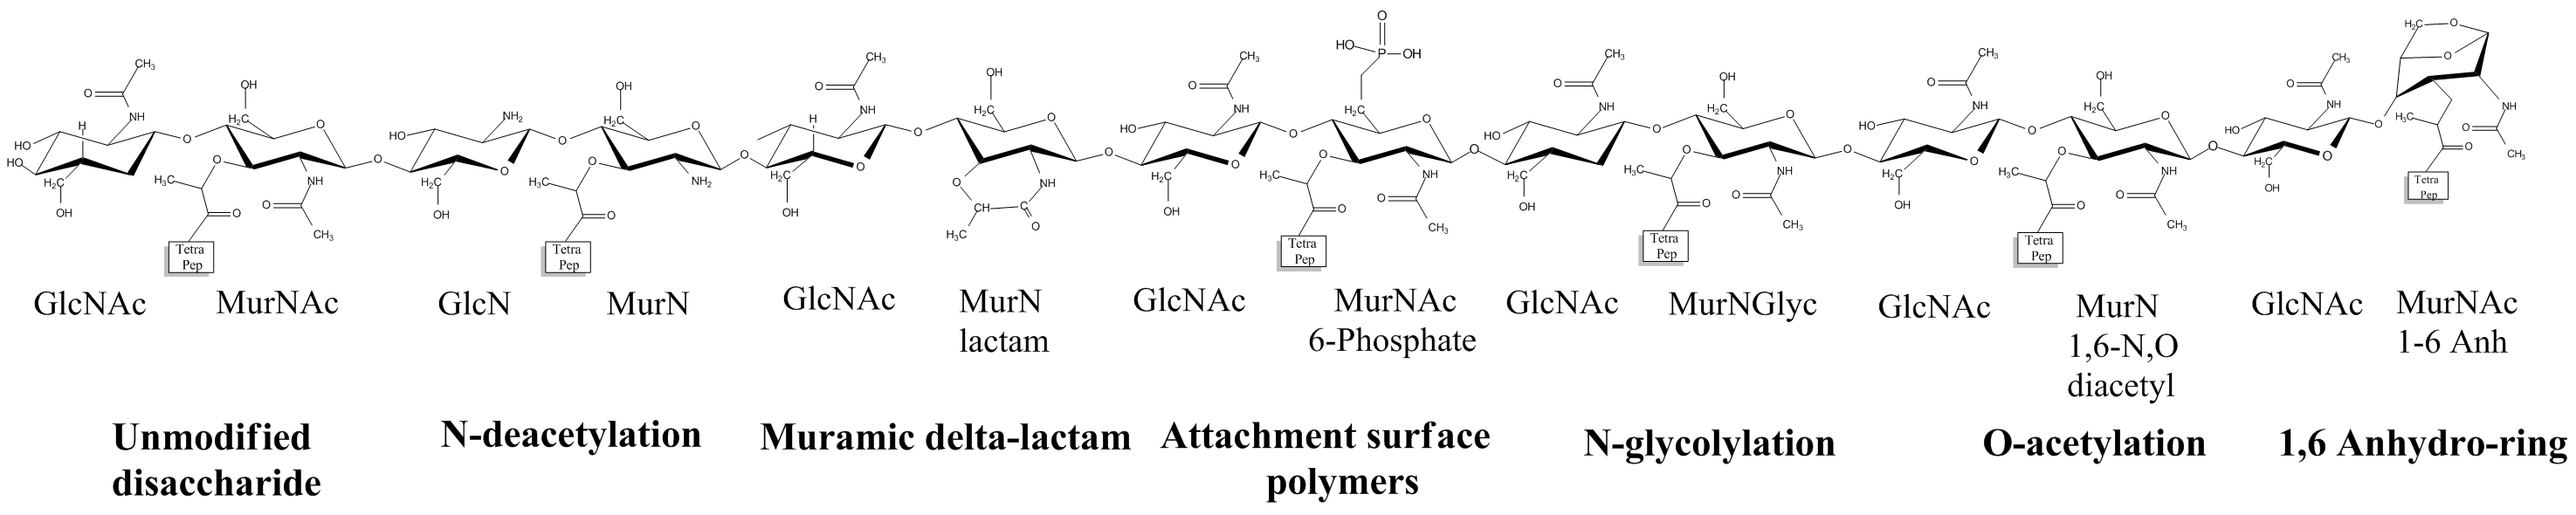 Figure 10: Some of the modifications reported on glycan strands. N-deacetylation and O-acetylation increase bacterial virulence through acquired resistance to lysozyme activity. N-glycolylation is a modification mainly restricted to Mycobacteria, which is thought to have a similar function. Muramic acid Î´-lactam is limited to spores, where it is a specific target of germination-dedicated hydrolases. Two other common modifications are the attachment to macromolecules (glycopolymers, Lpp...) and the formation of an 1,6-anhydro ring (at the end of the strand). Taken from Vollmer, 2008